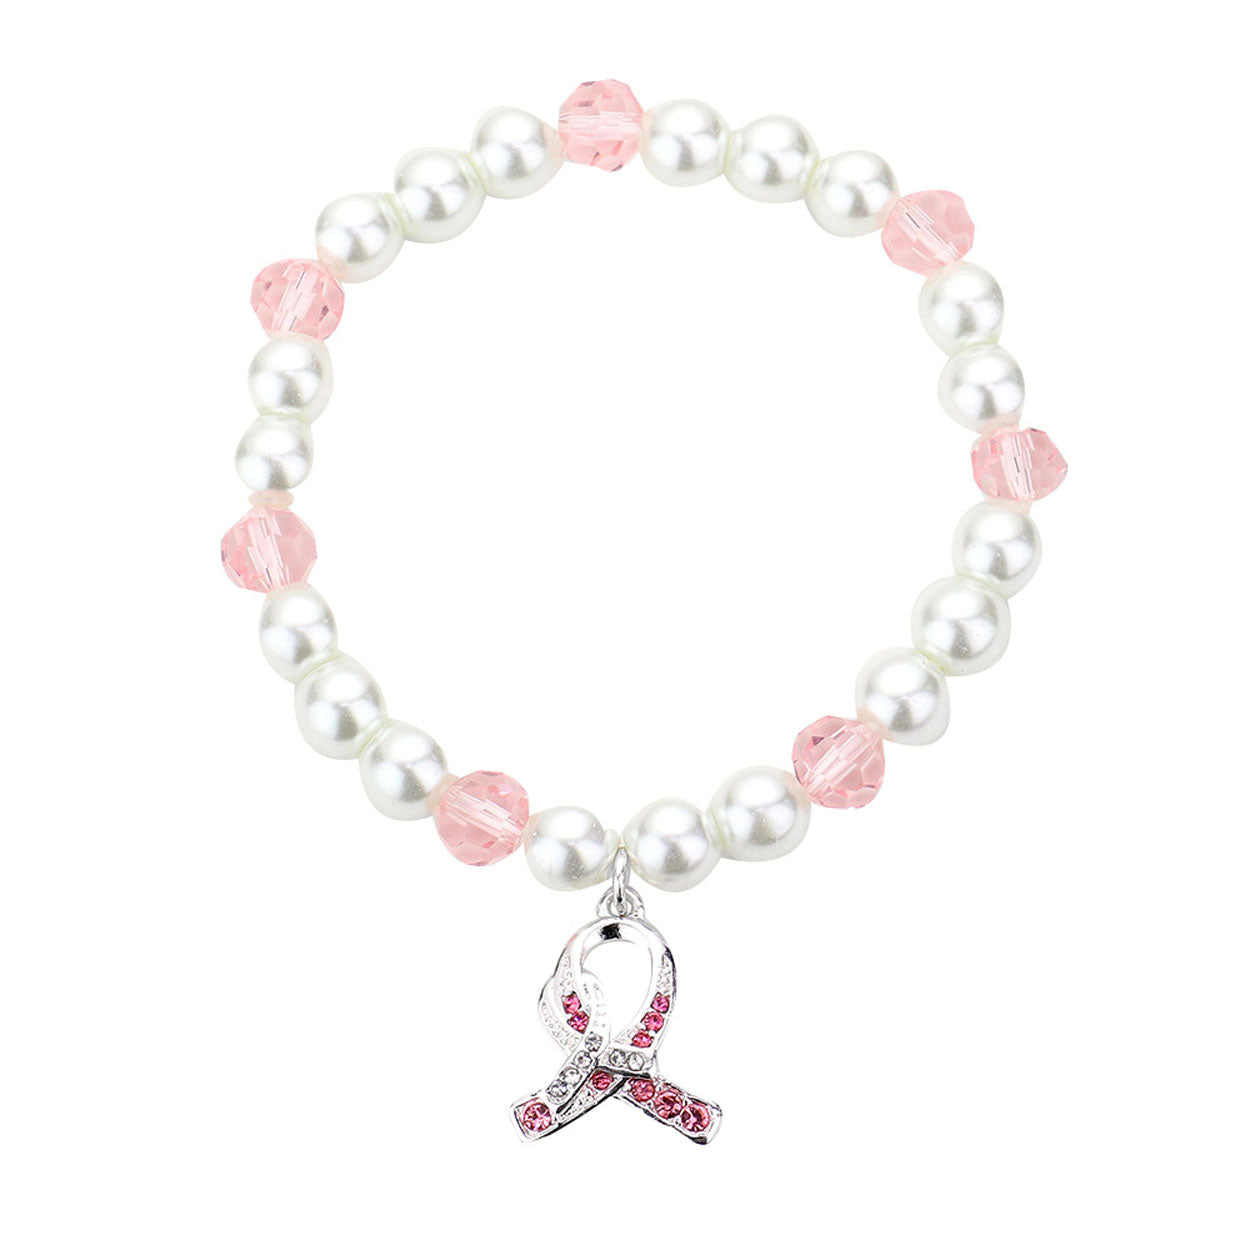 Pink Rhinestone Pink Ribbon Charm Pearl Stretch Bracelet, cute pearl stretch and subtle sleek style, just what you need to update your wardrobe. Bring a little of the ocean to your daily look. Jewelry that fits your lifestyle. Perfect Birthday Gift, Anniversary Gift, Mother's Day Gift, Mom Gift, Thank you Gift, Just Because Gift, Daily Wear.